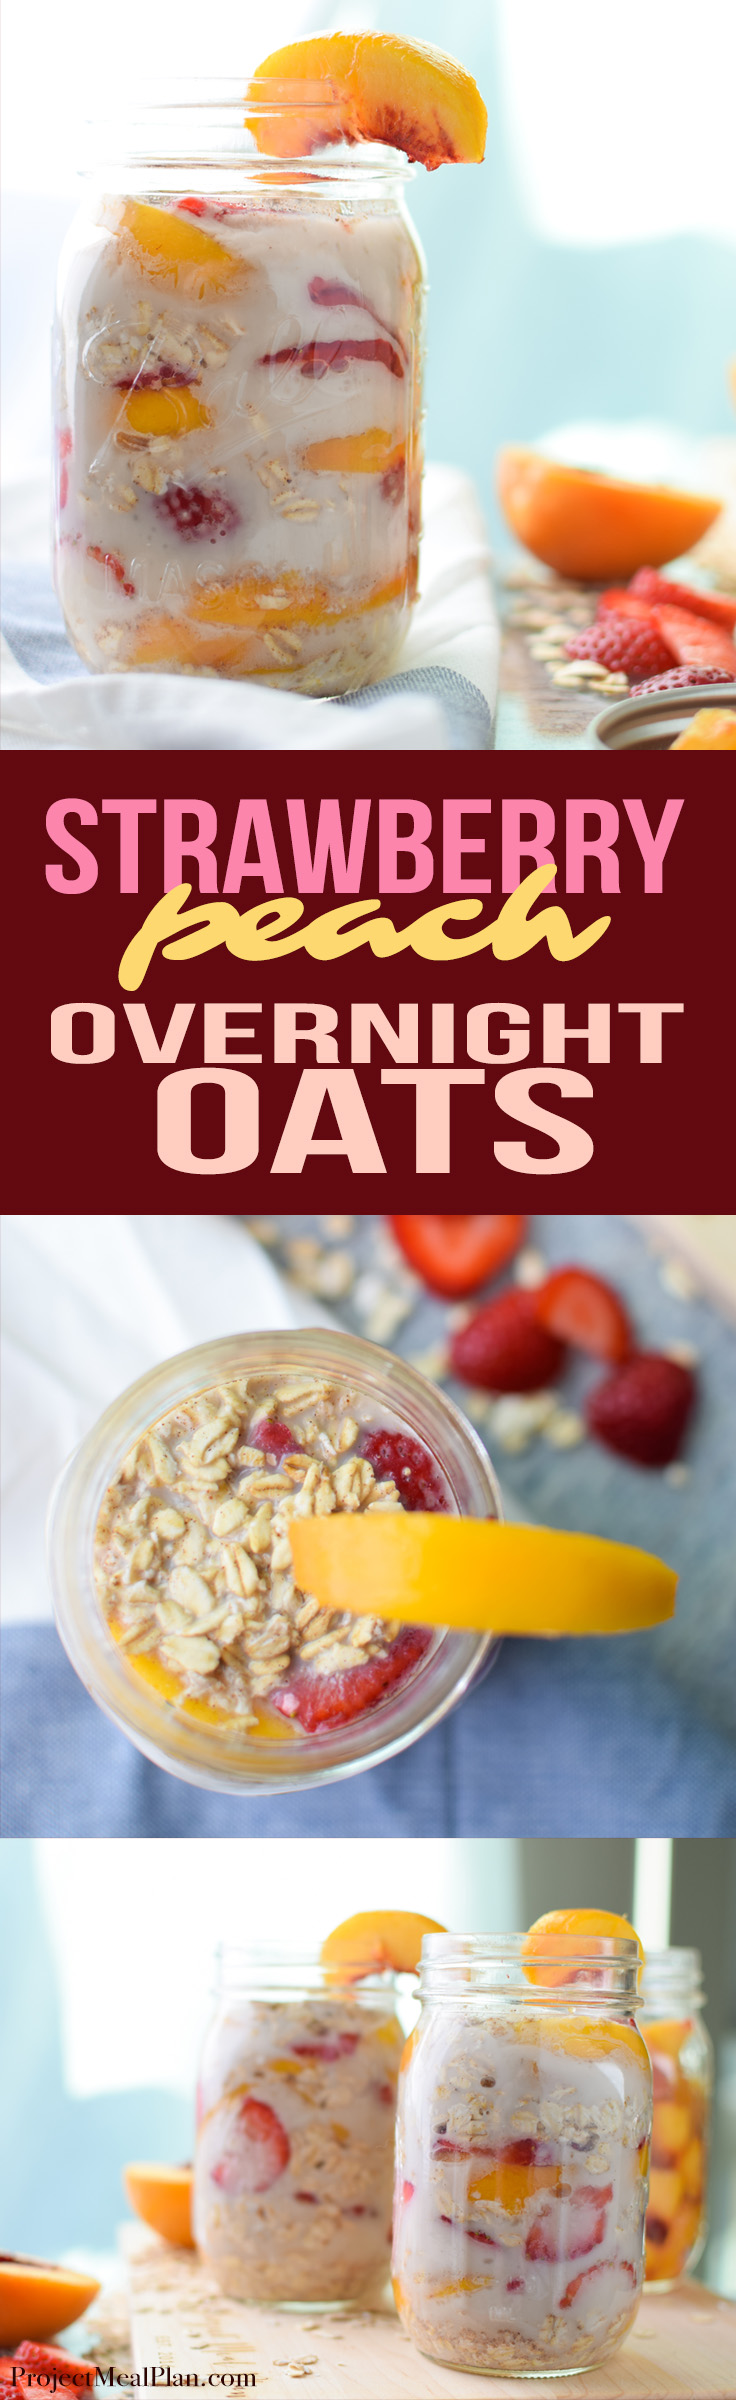 Strawberry Peach Overnight Oats Recipe - Pull this super tasty treat out of the fridge in the morning for some filling oats, strawberries and peaches in almond milk! Sooo creamy! - ProjectMealPlan.com